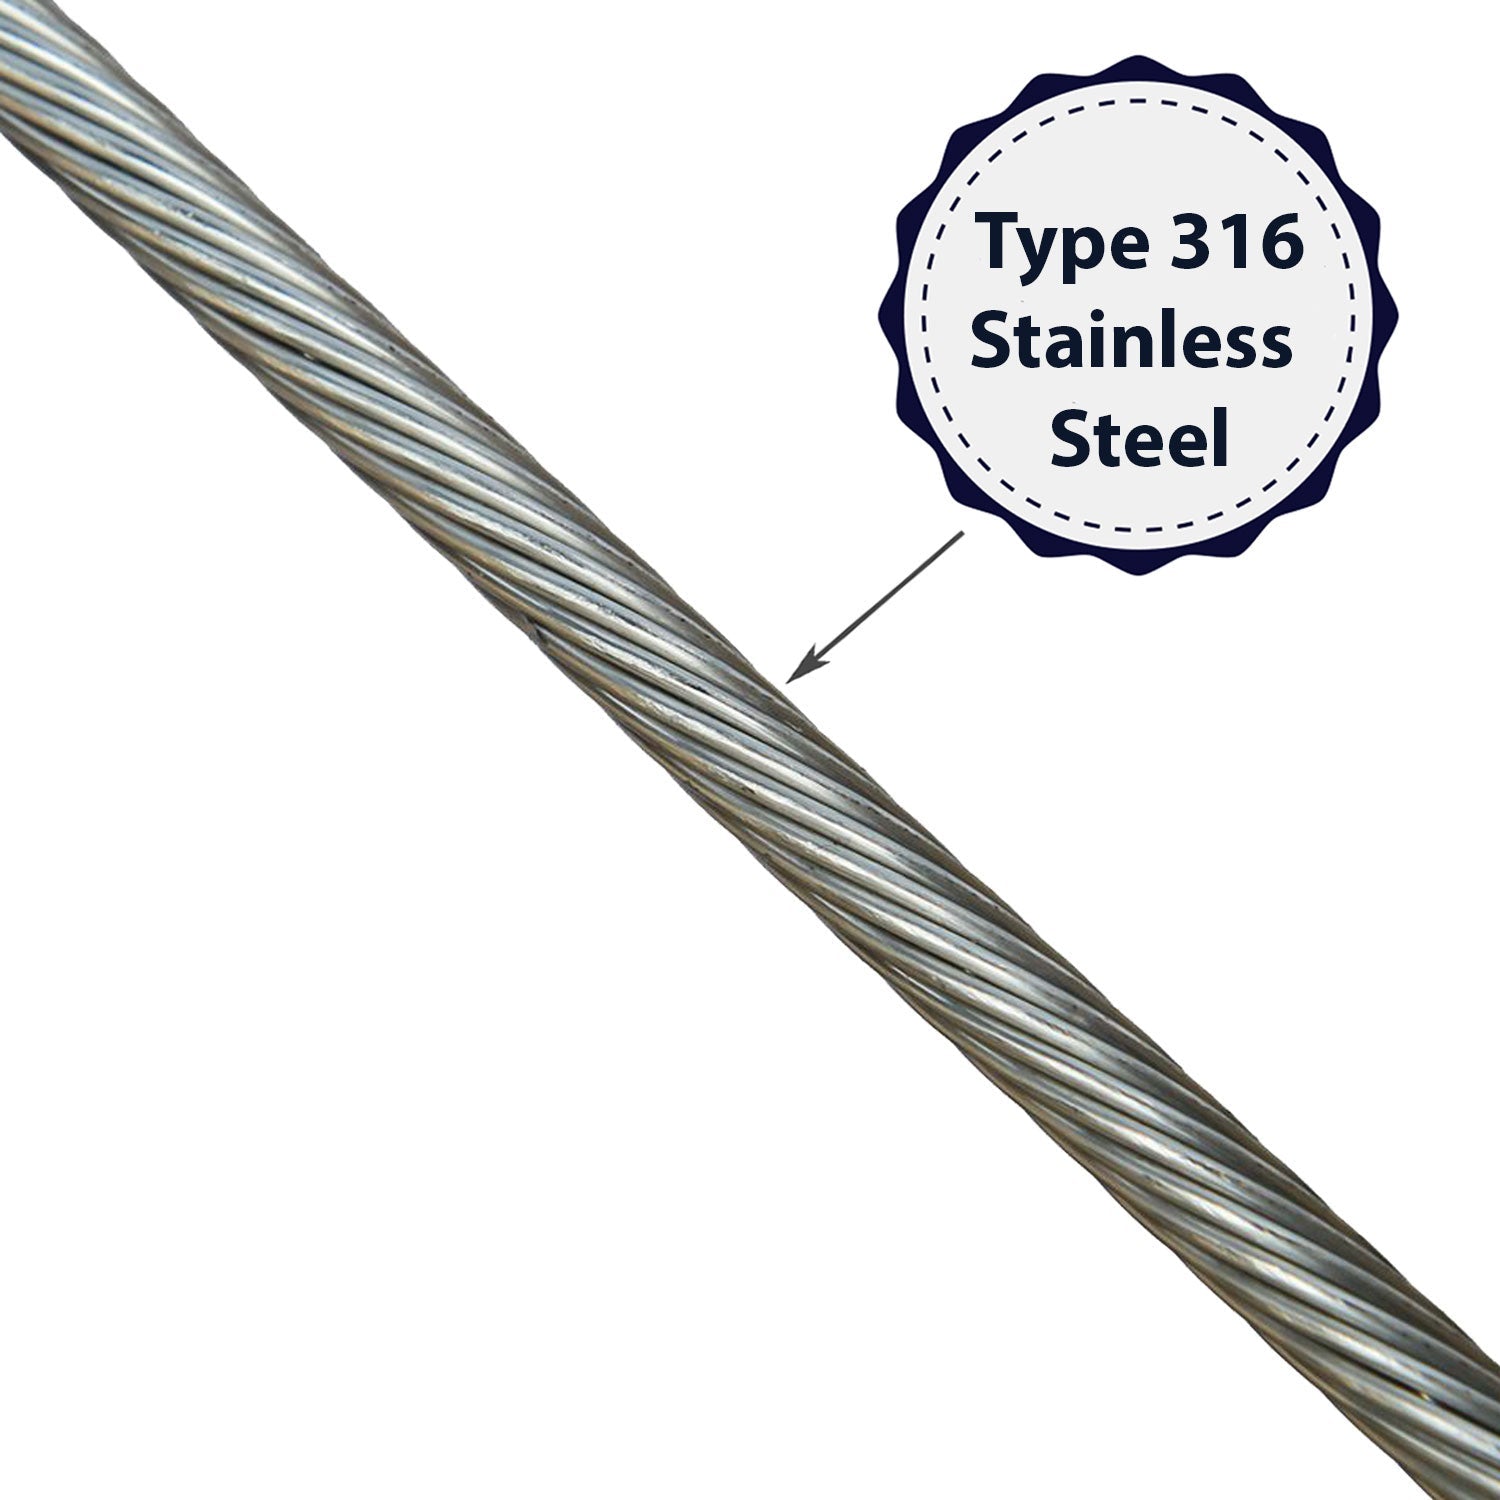 3/16 Stainless Steel Cable Railing Wire Rope 1x19 Type 316 700 Feet